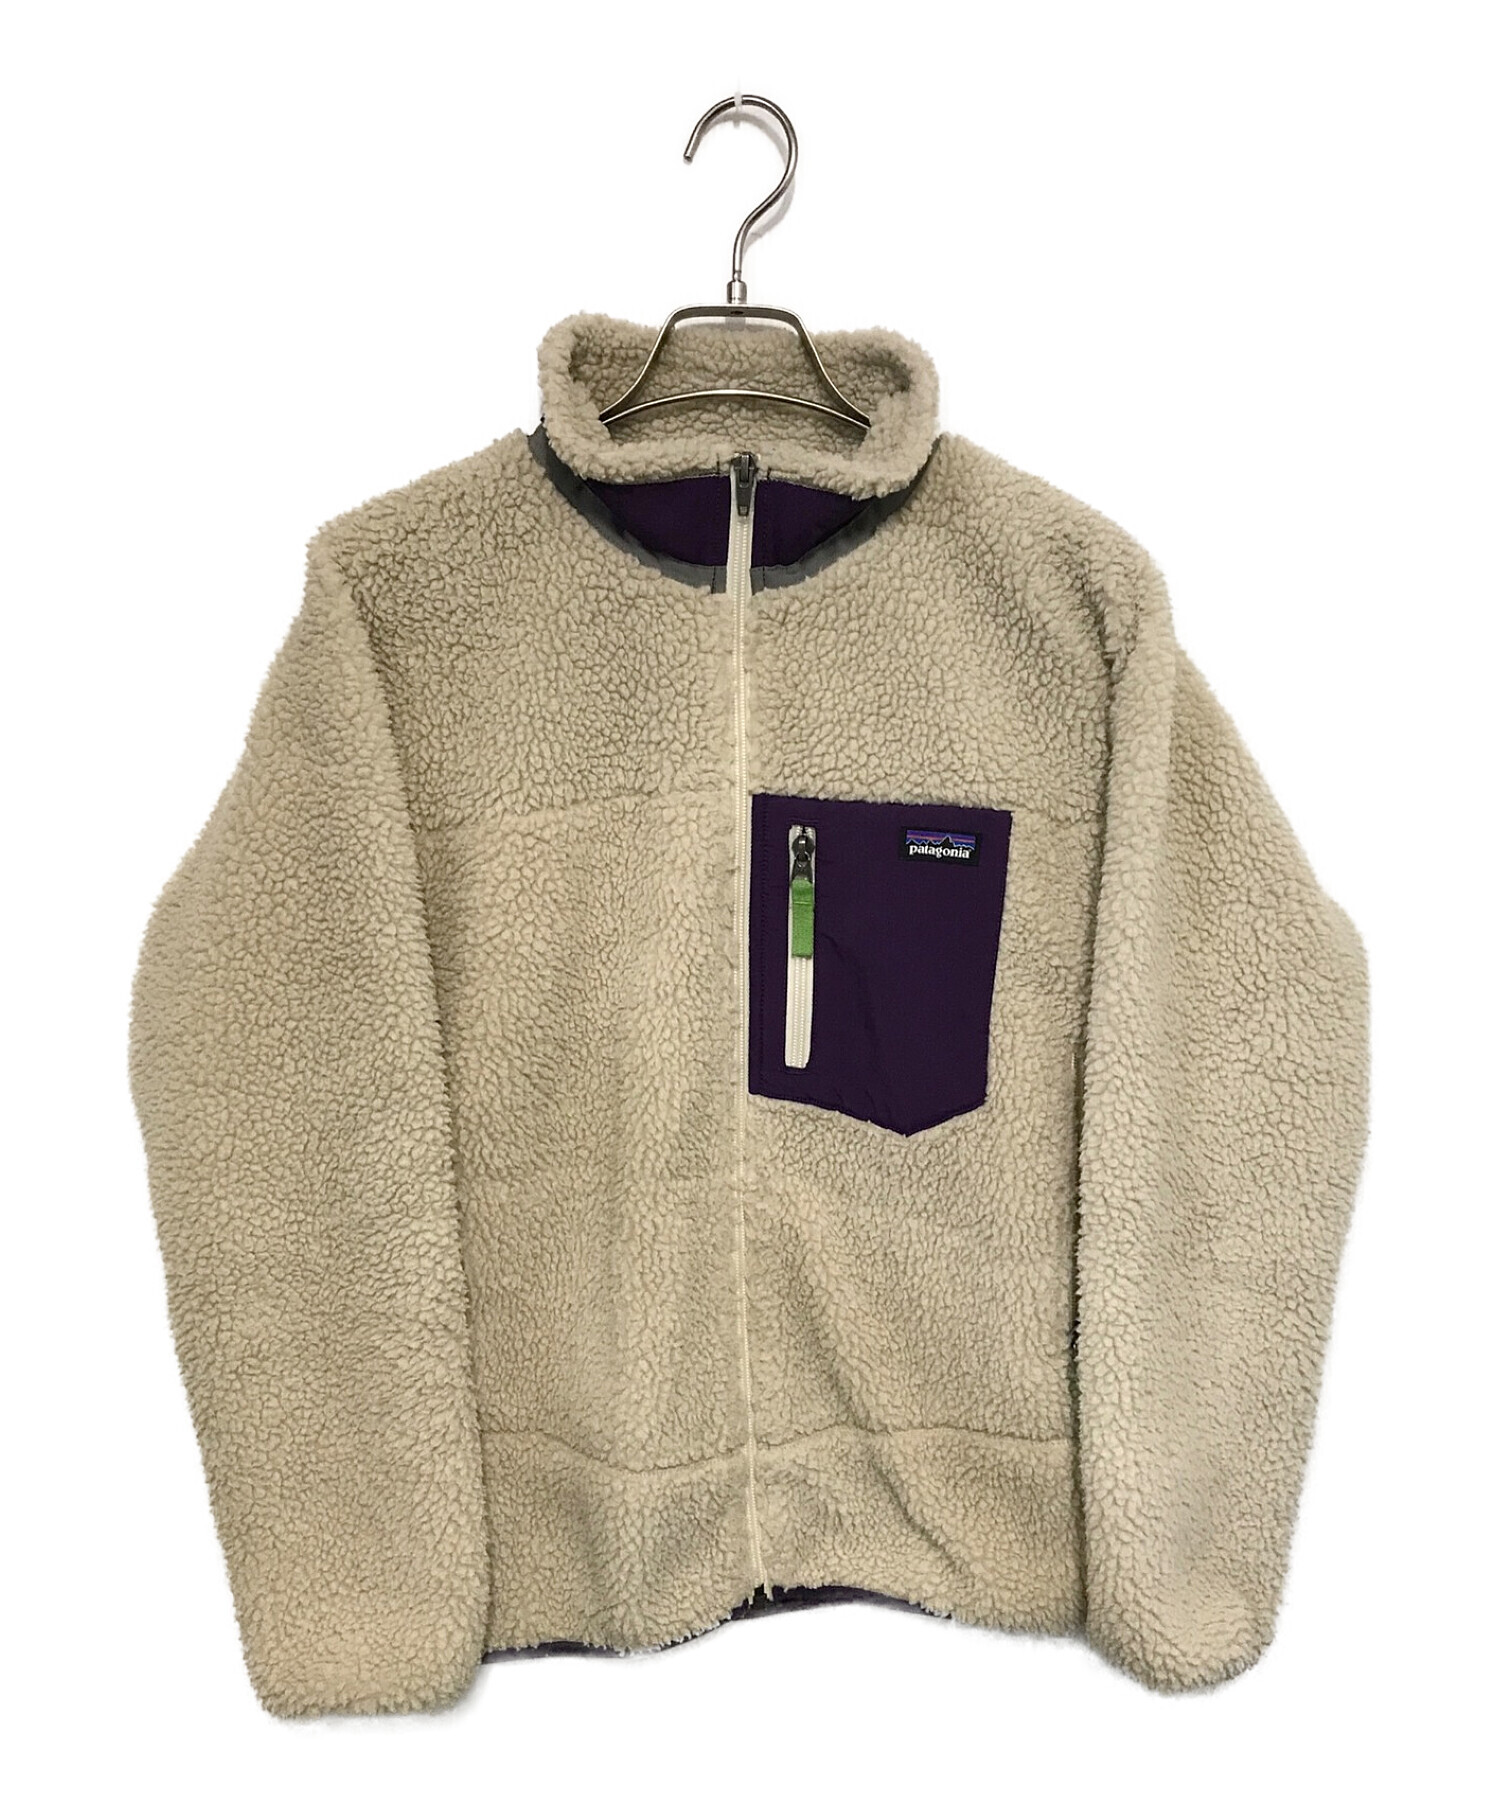 patagonia レトロ X キッズ XL 新品